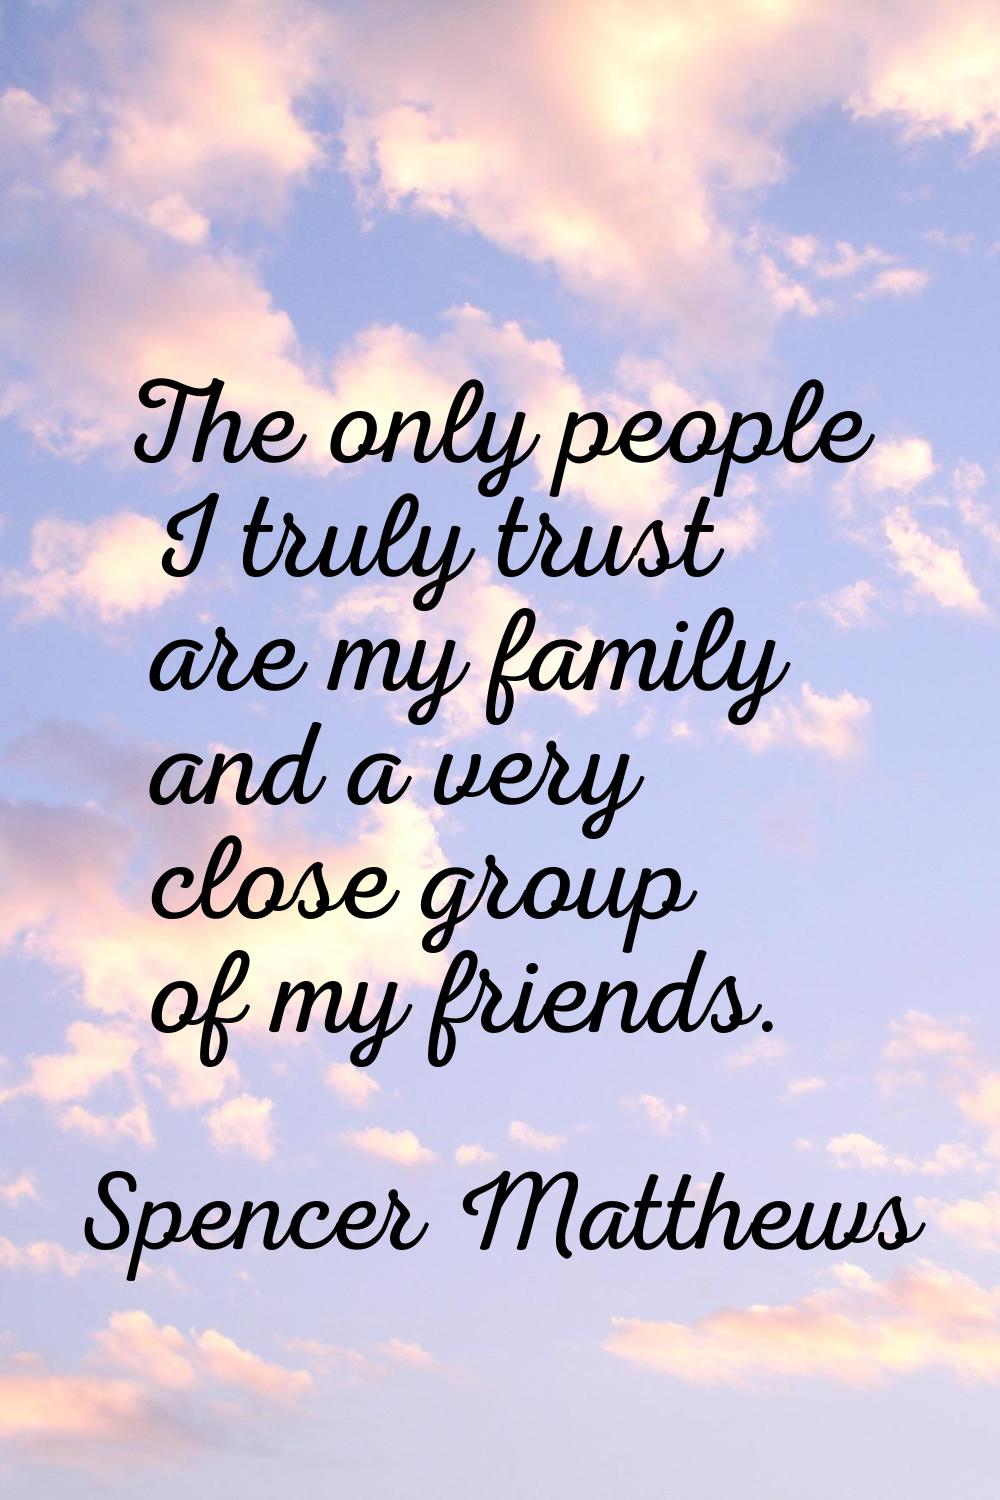 The only people I truly trust are my family and a very close group of my friends.